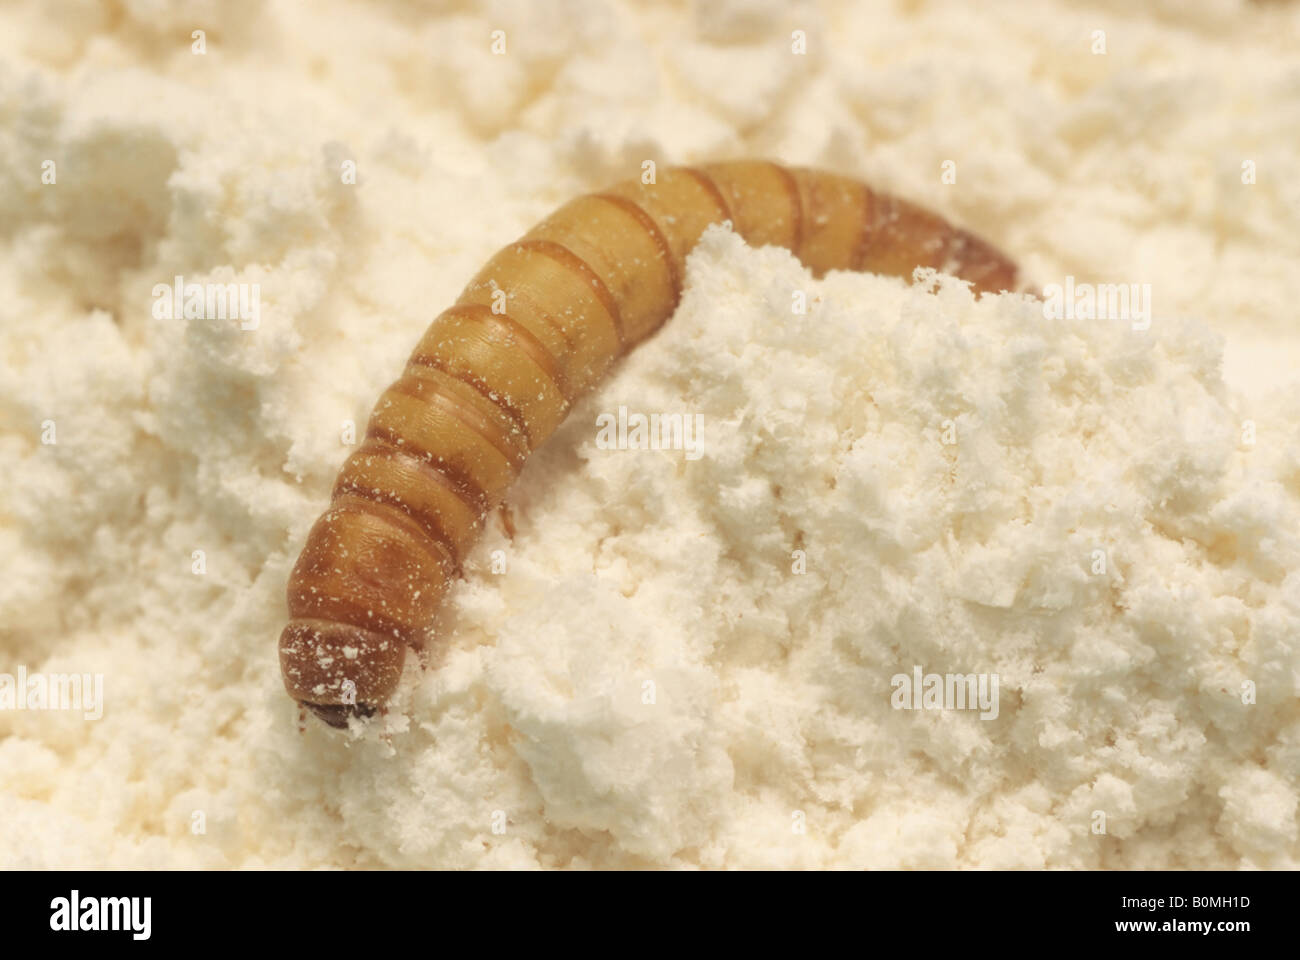 Mealworm in flour, bug, pest, spread of germs, USA Stock Photo